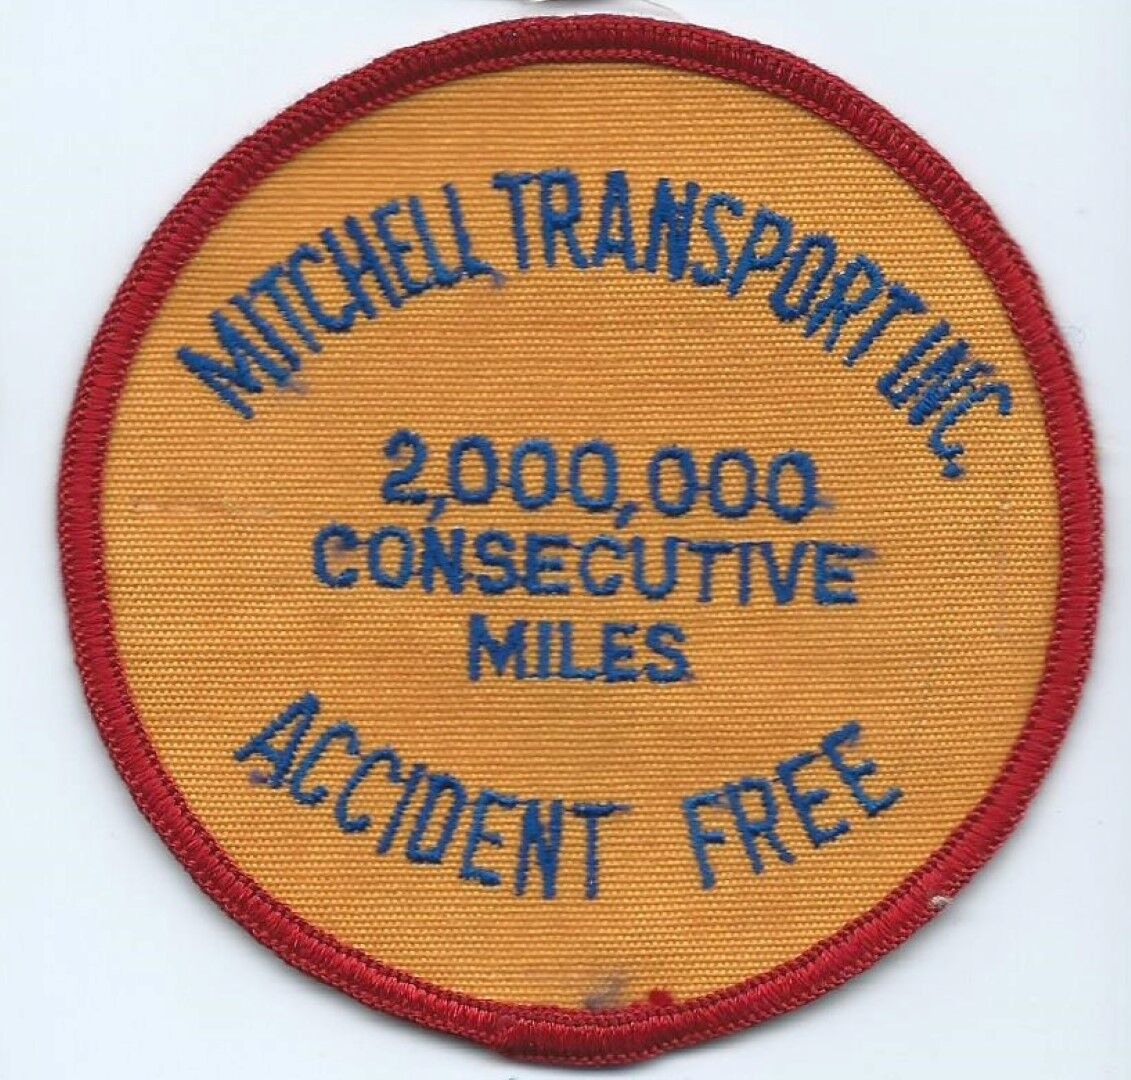 Mitchell Transport Inc 2,000,000 mile accident free driver patch 3-3/4 #1215